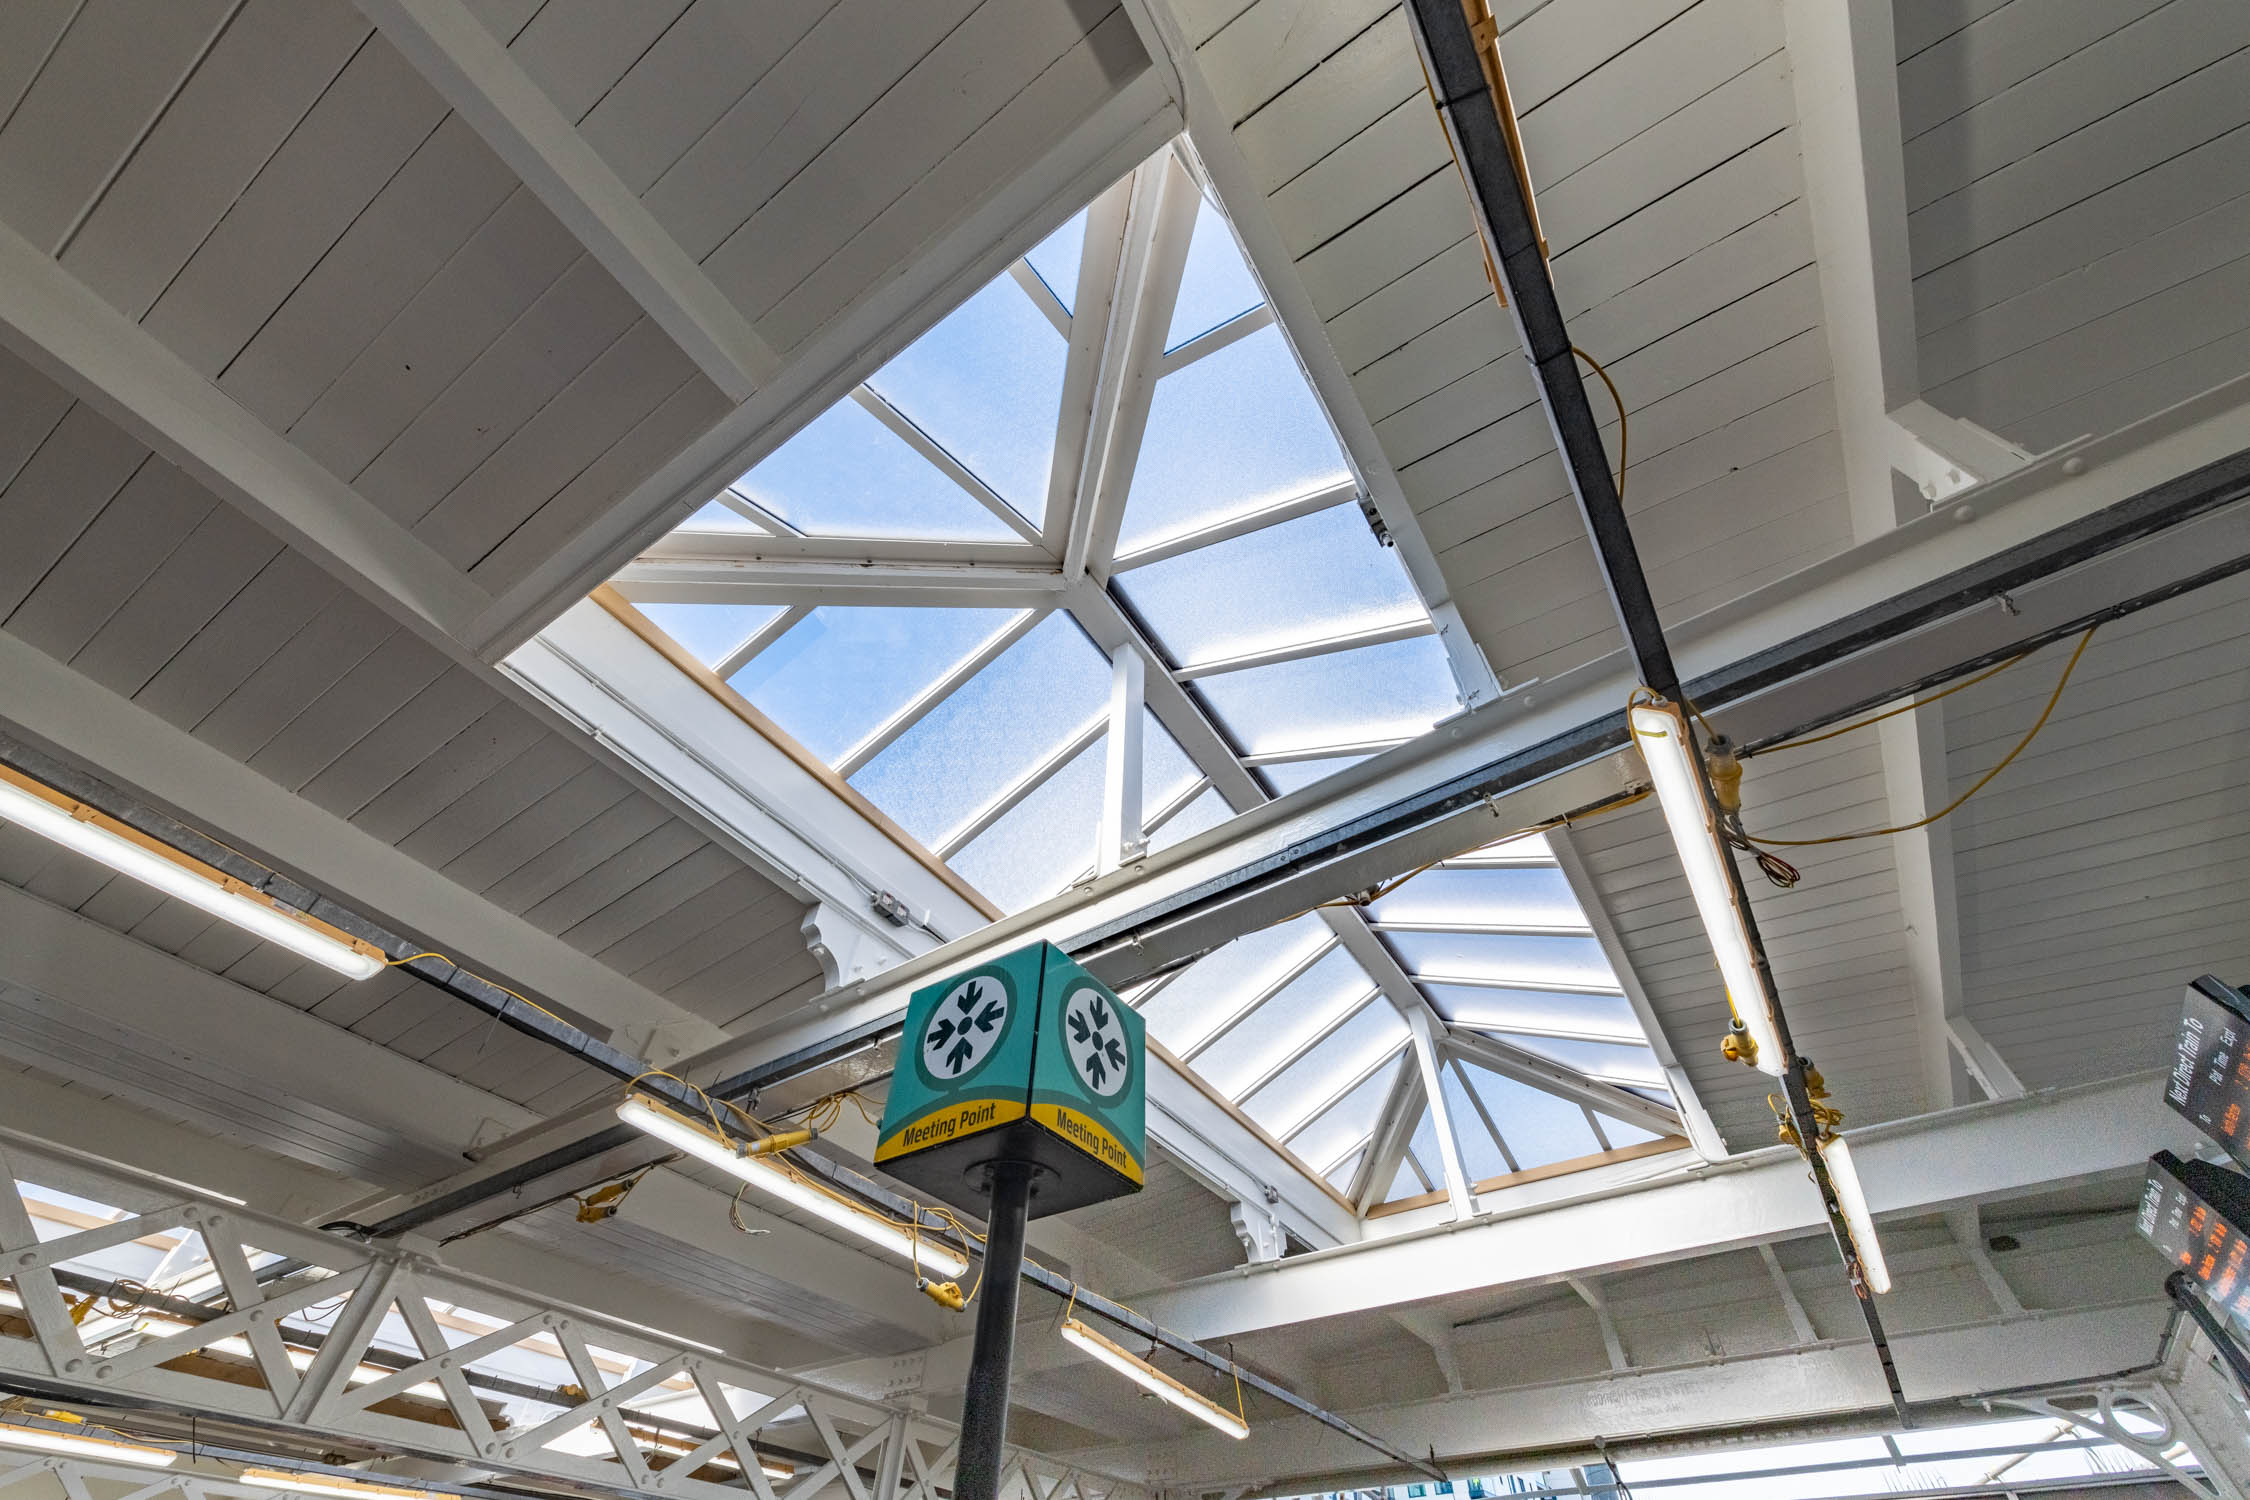 Case Study Sutton Station – Breathing new life into an old station